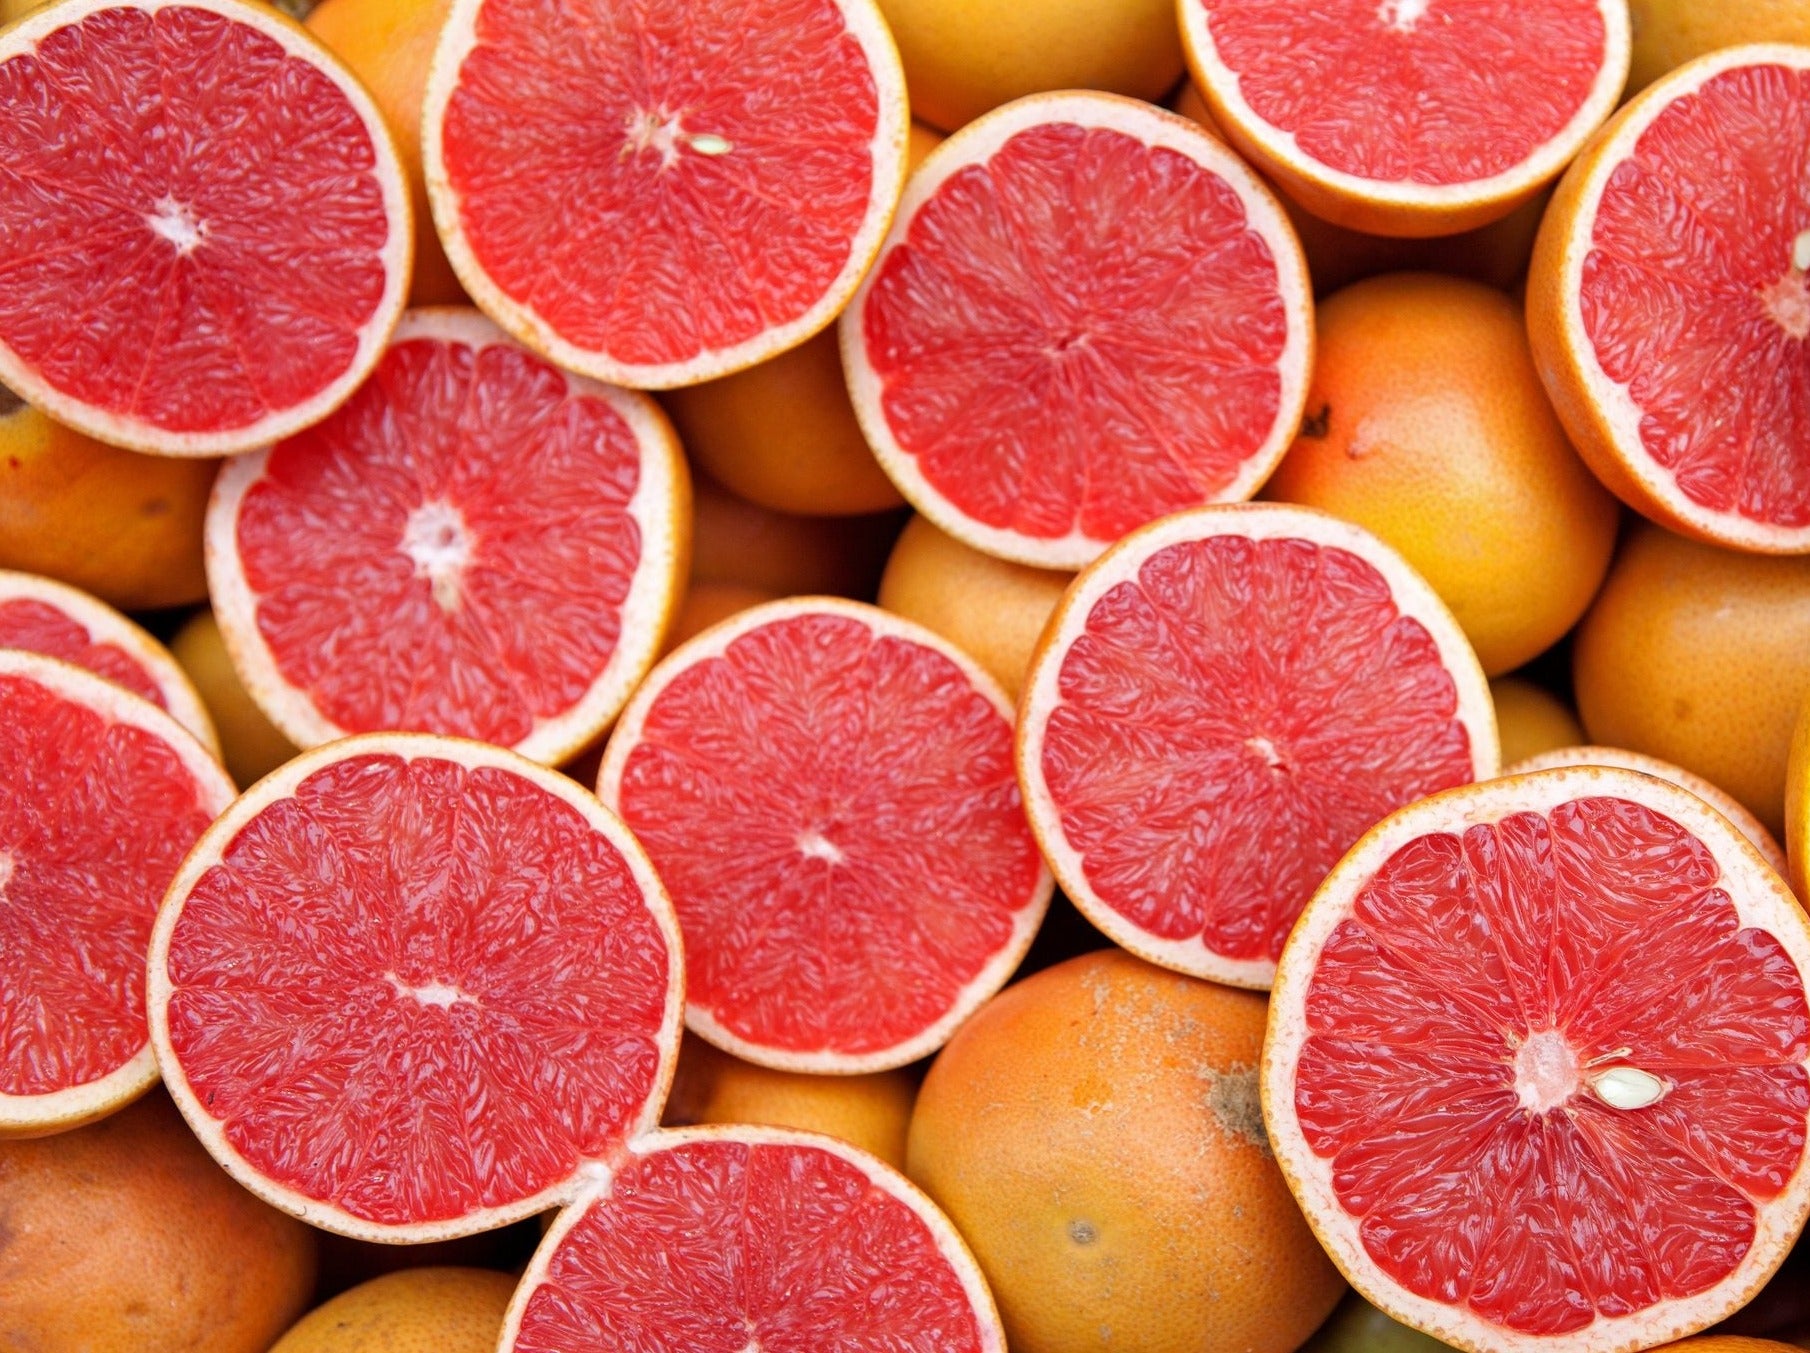 Many grapefruits with some cut in half to show off the fruity centre that people consume as a delicious snack or juice to create oils for its many other uses.